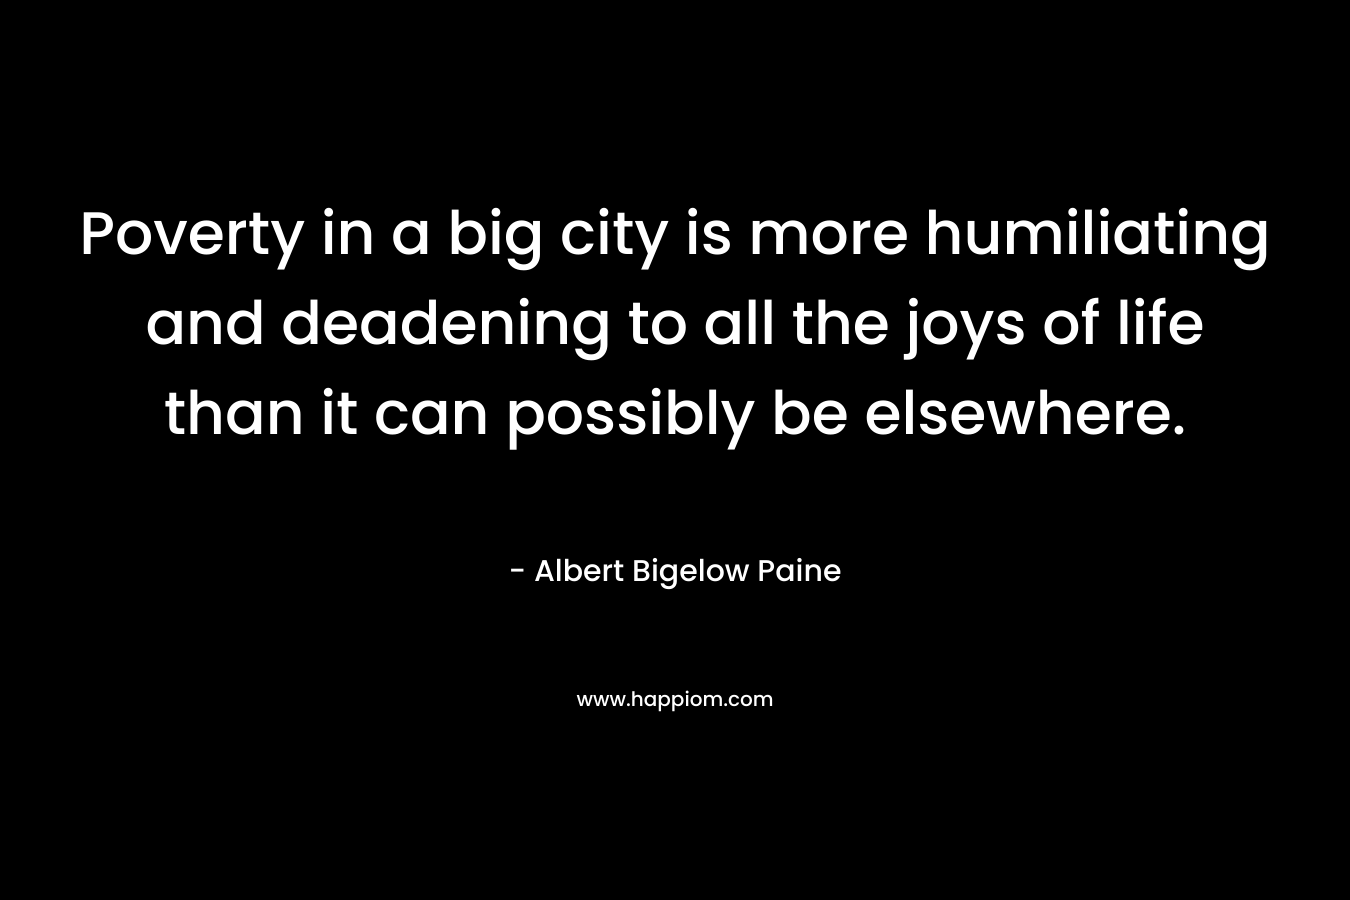 Poverty in a big city is more humiliating and deadening to all the joys of life than it can possibly be elsewhere. – Albert Bigelow Paine